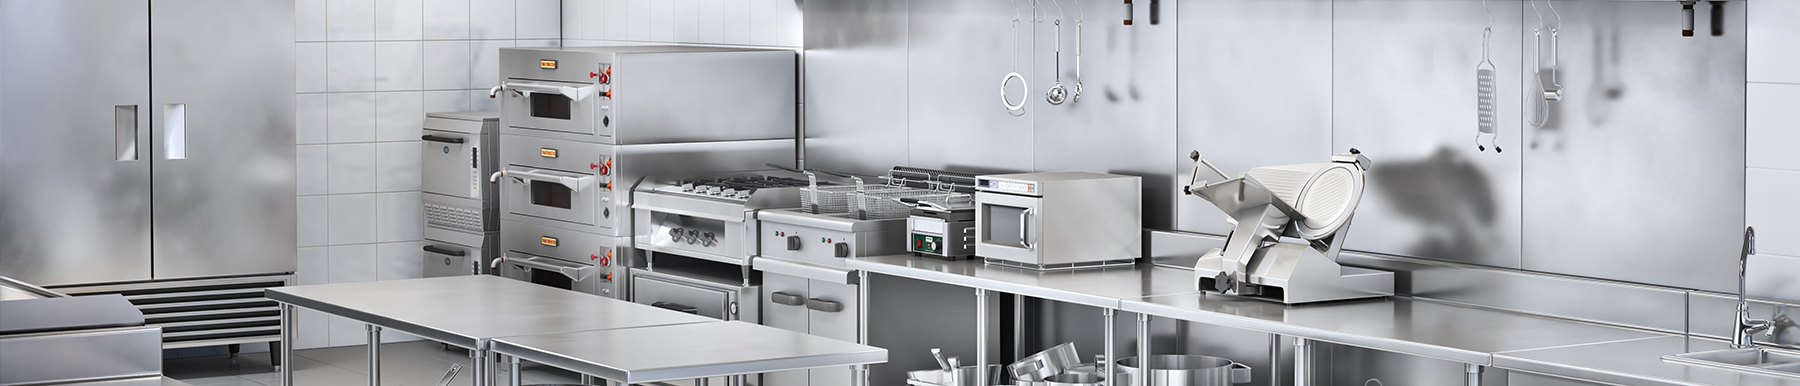 Catering Equipment Suppliers Near St Helens | H2 Catering Equipment Catering Equipment